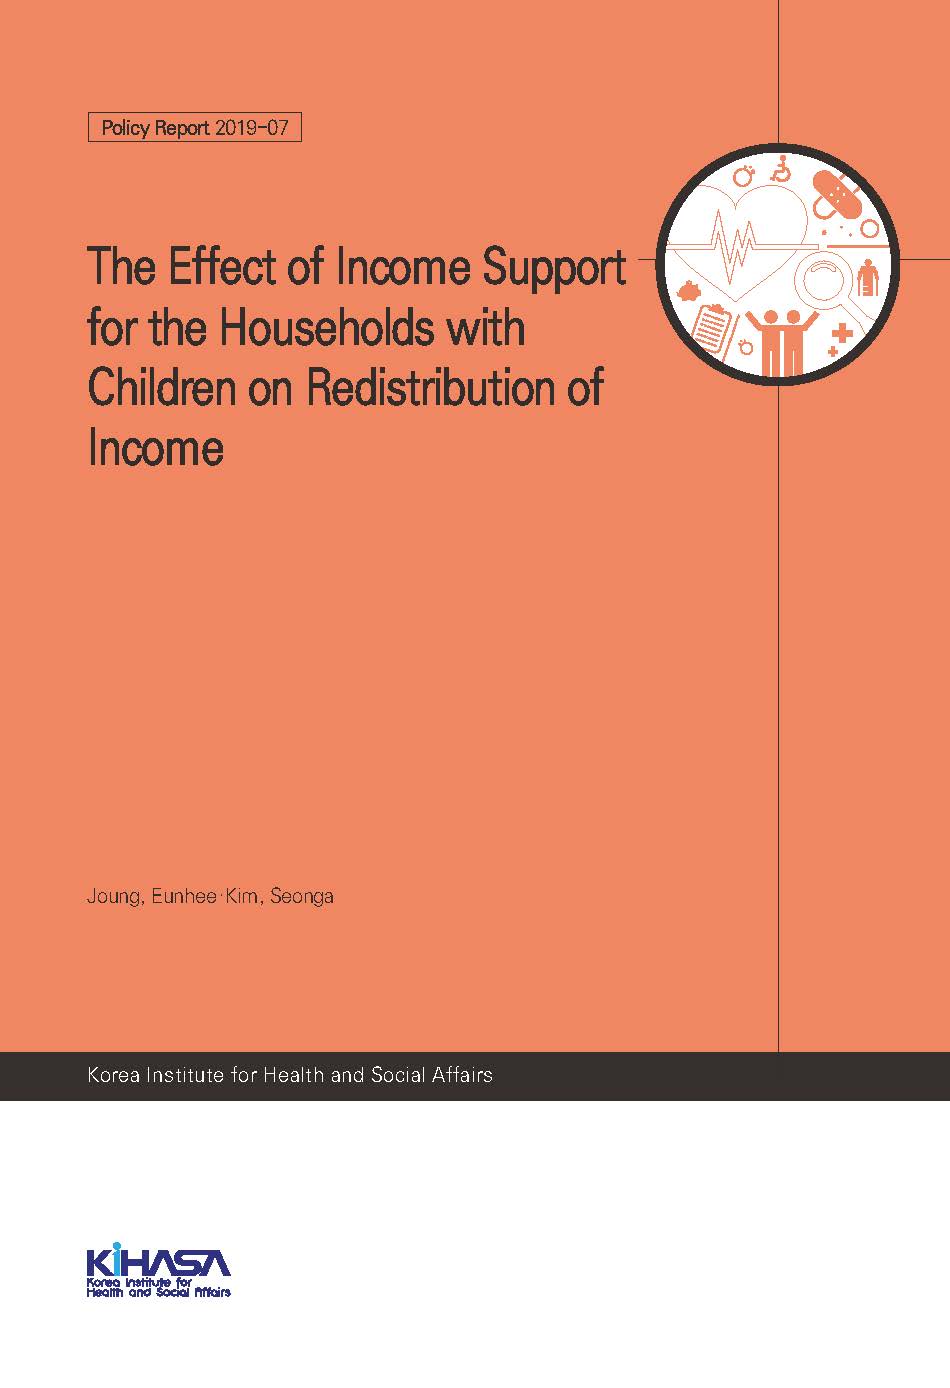 The Effect of Income Support for the Households with Children on Redistribution of Income